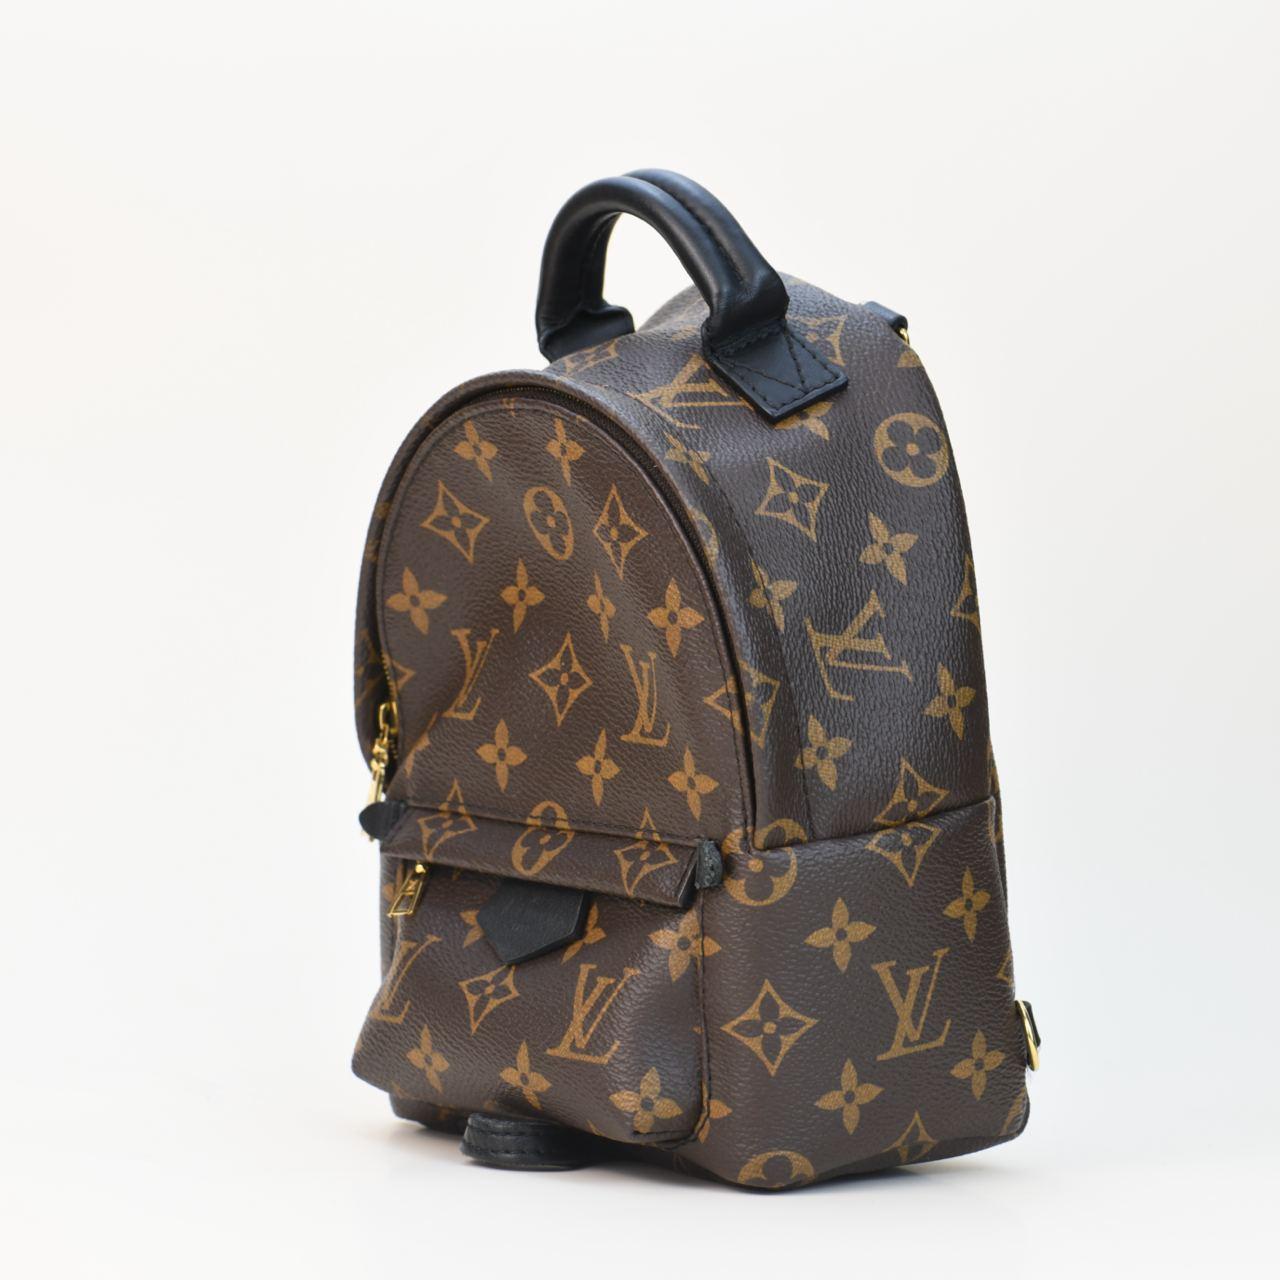 Louis Vuitton Palm Springs Mini Backpack In Excellent Condition For Sale In Banbury, GB